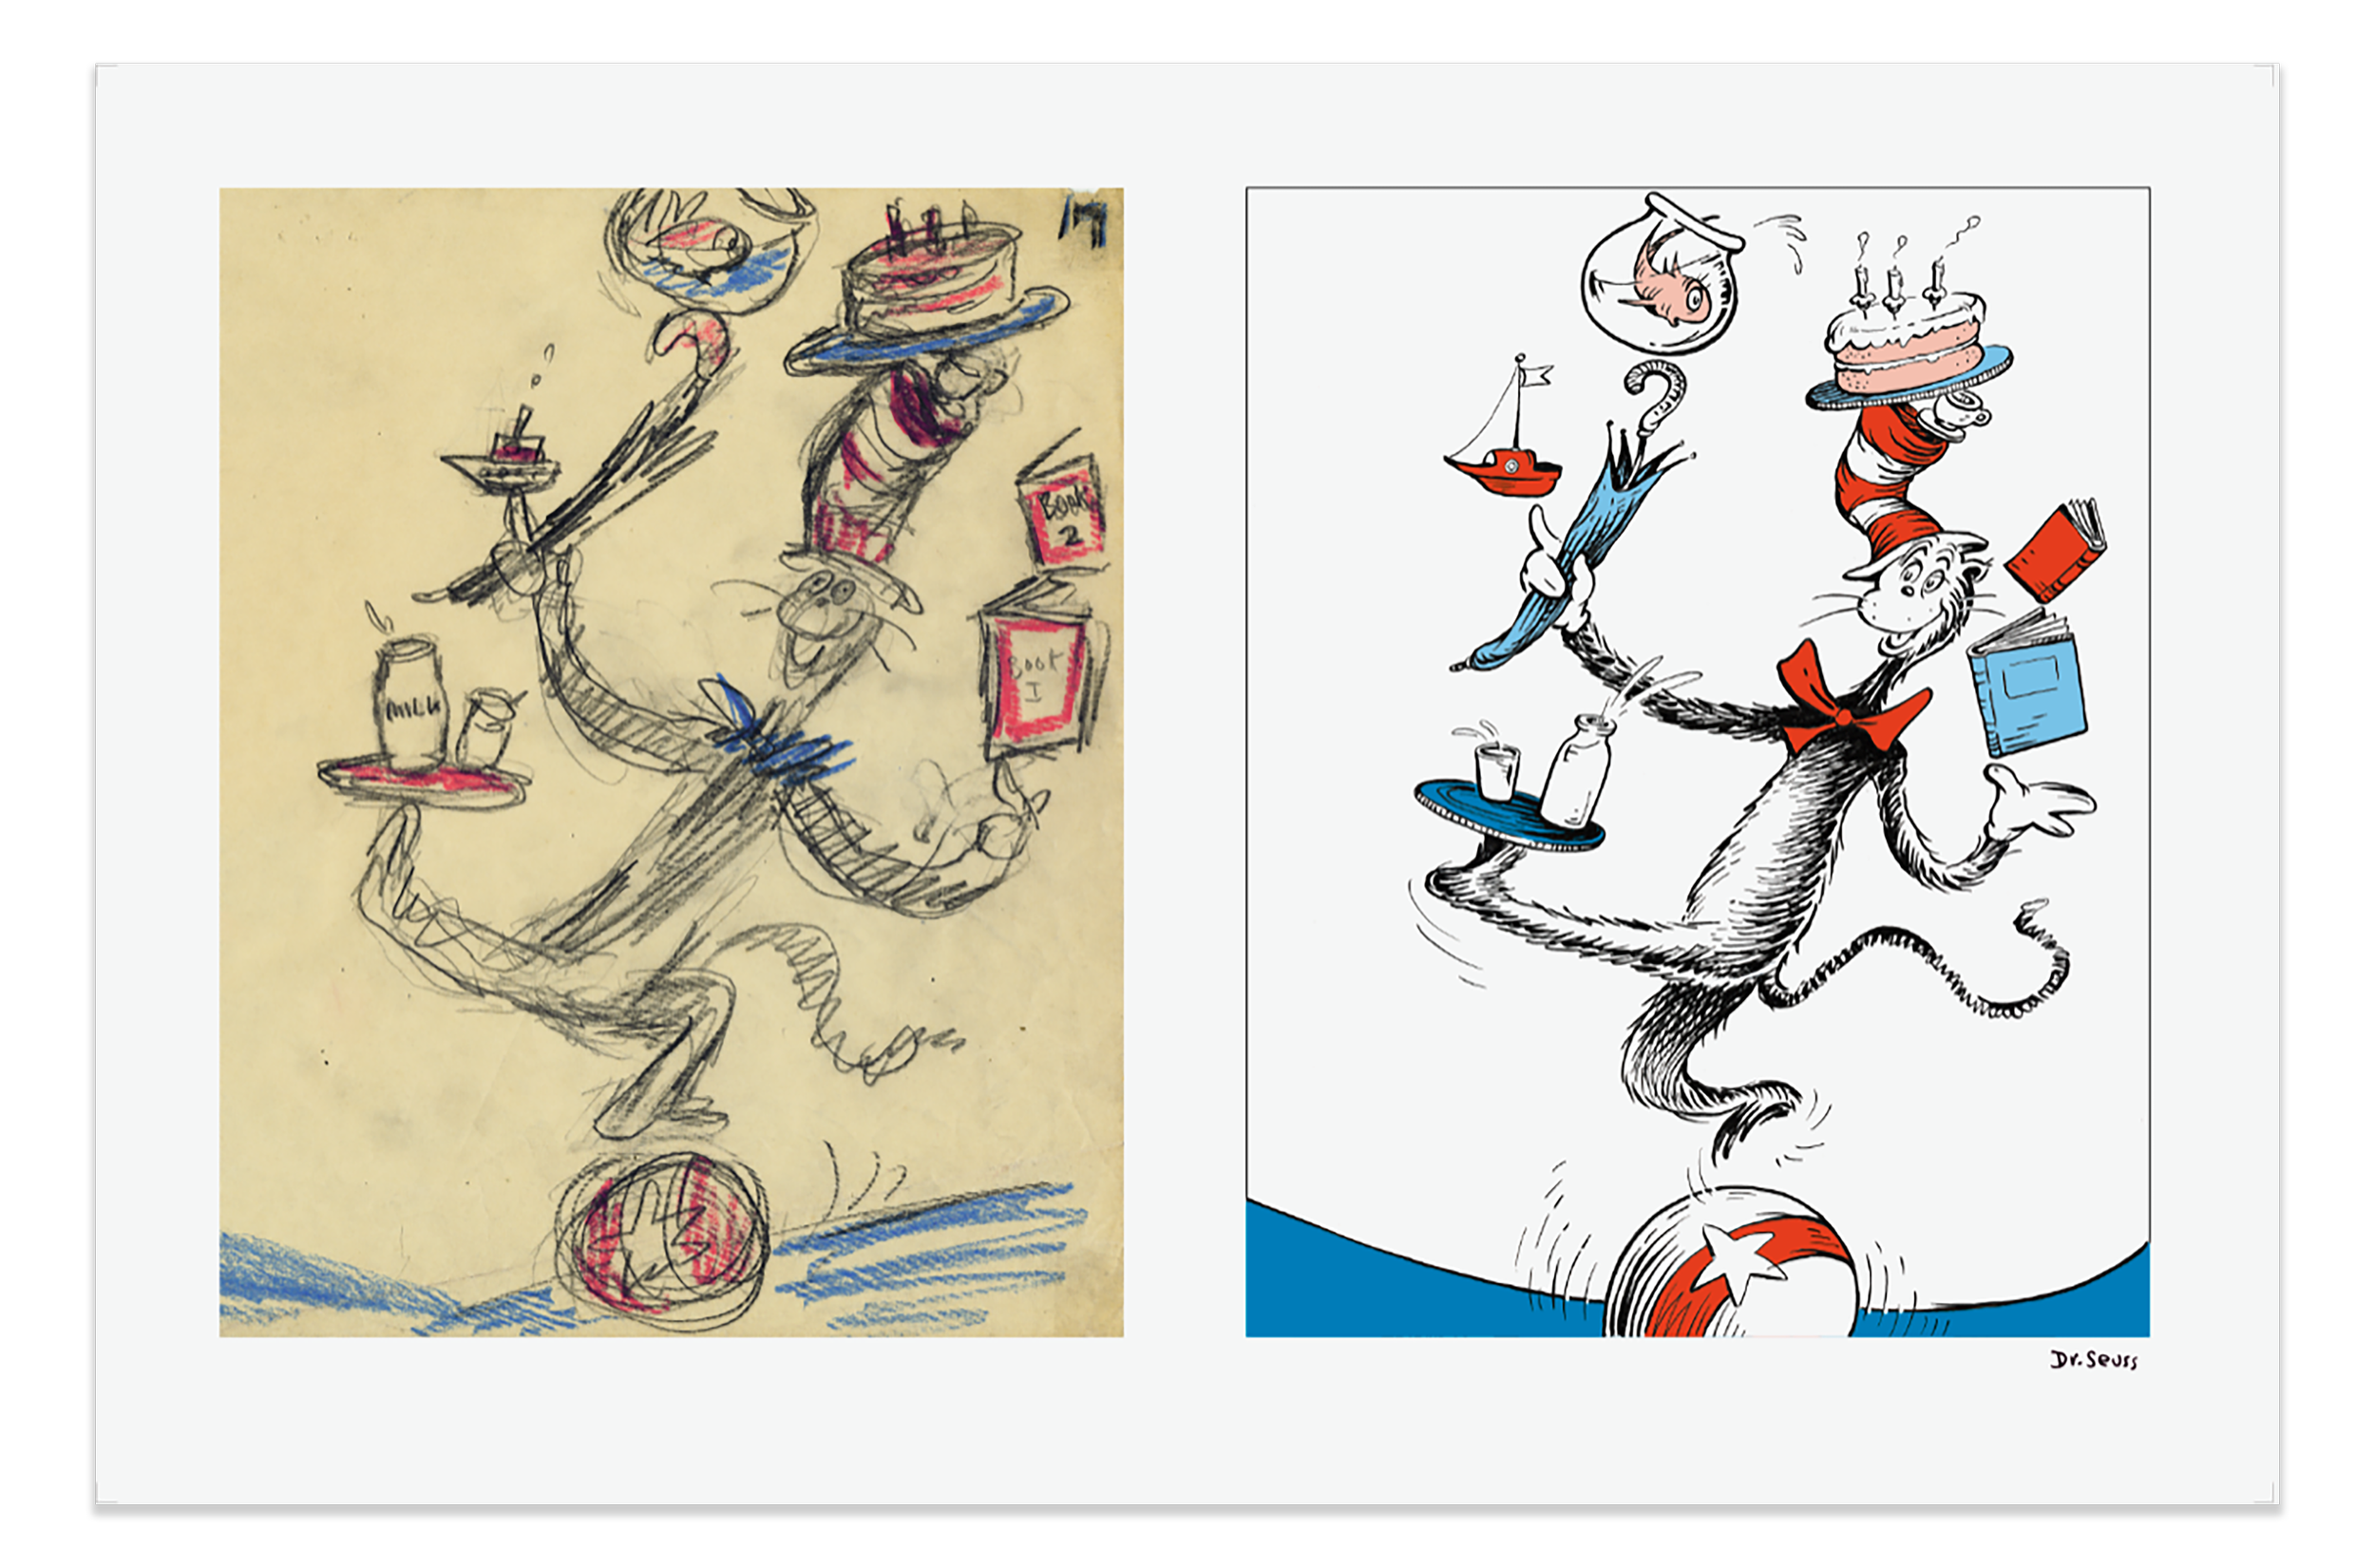 Look at Me! Look at Me Now! - New Release — The Art of Dr. Seuss  Collection, Published by Chaseart Companies